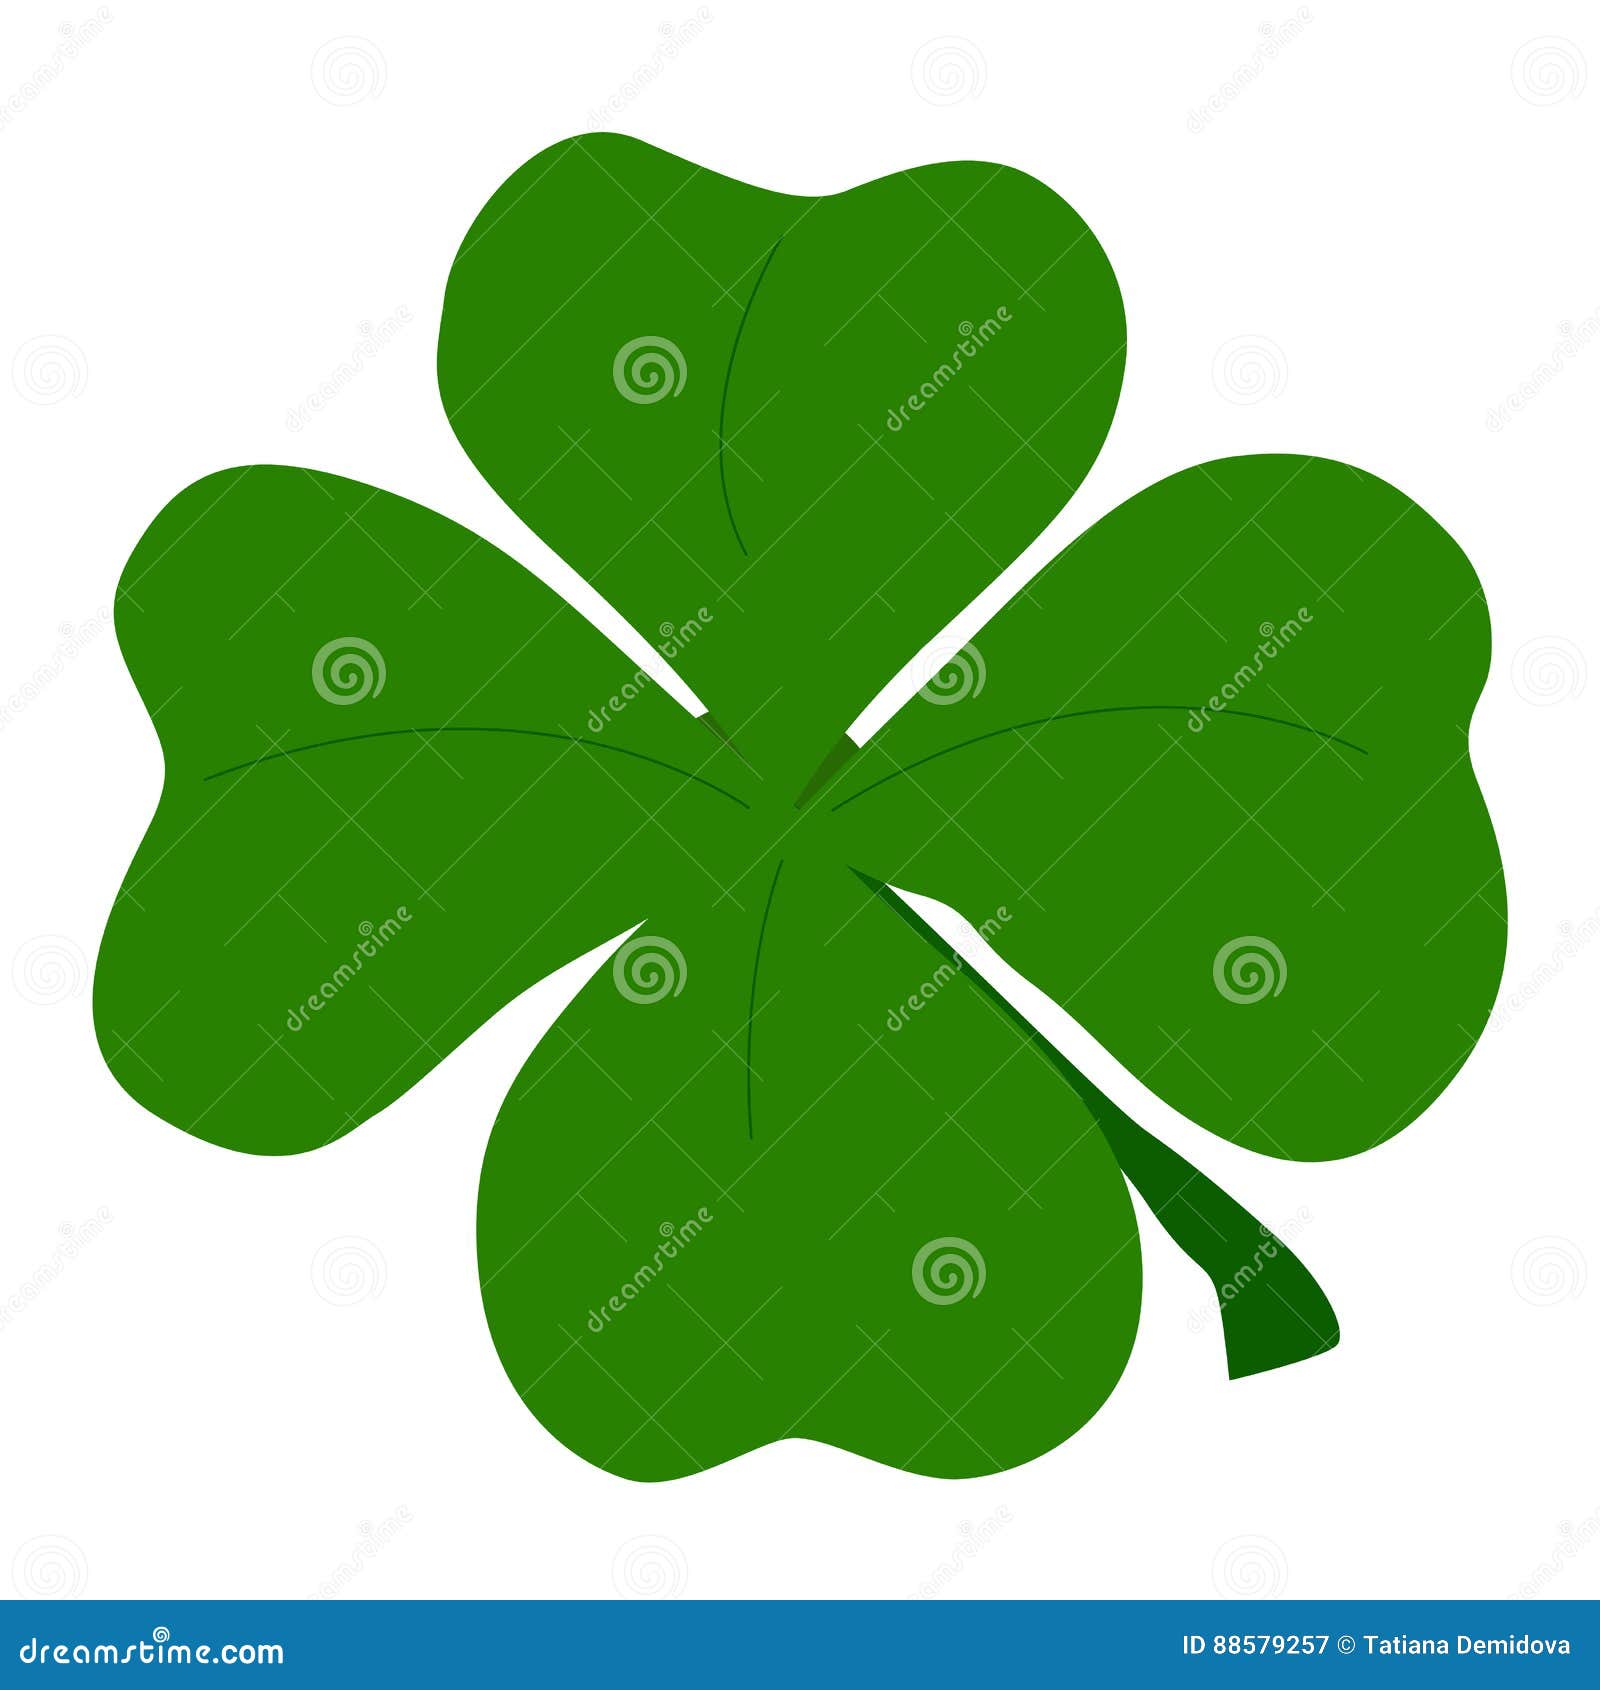 icon green cloverleaf on a white background. a template for the